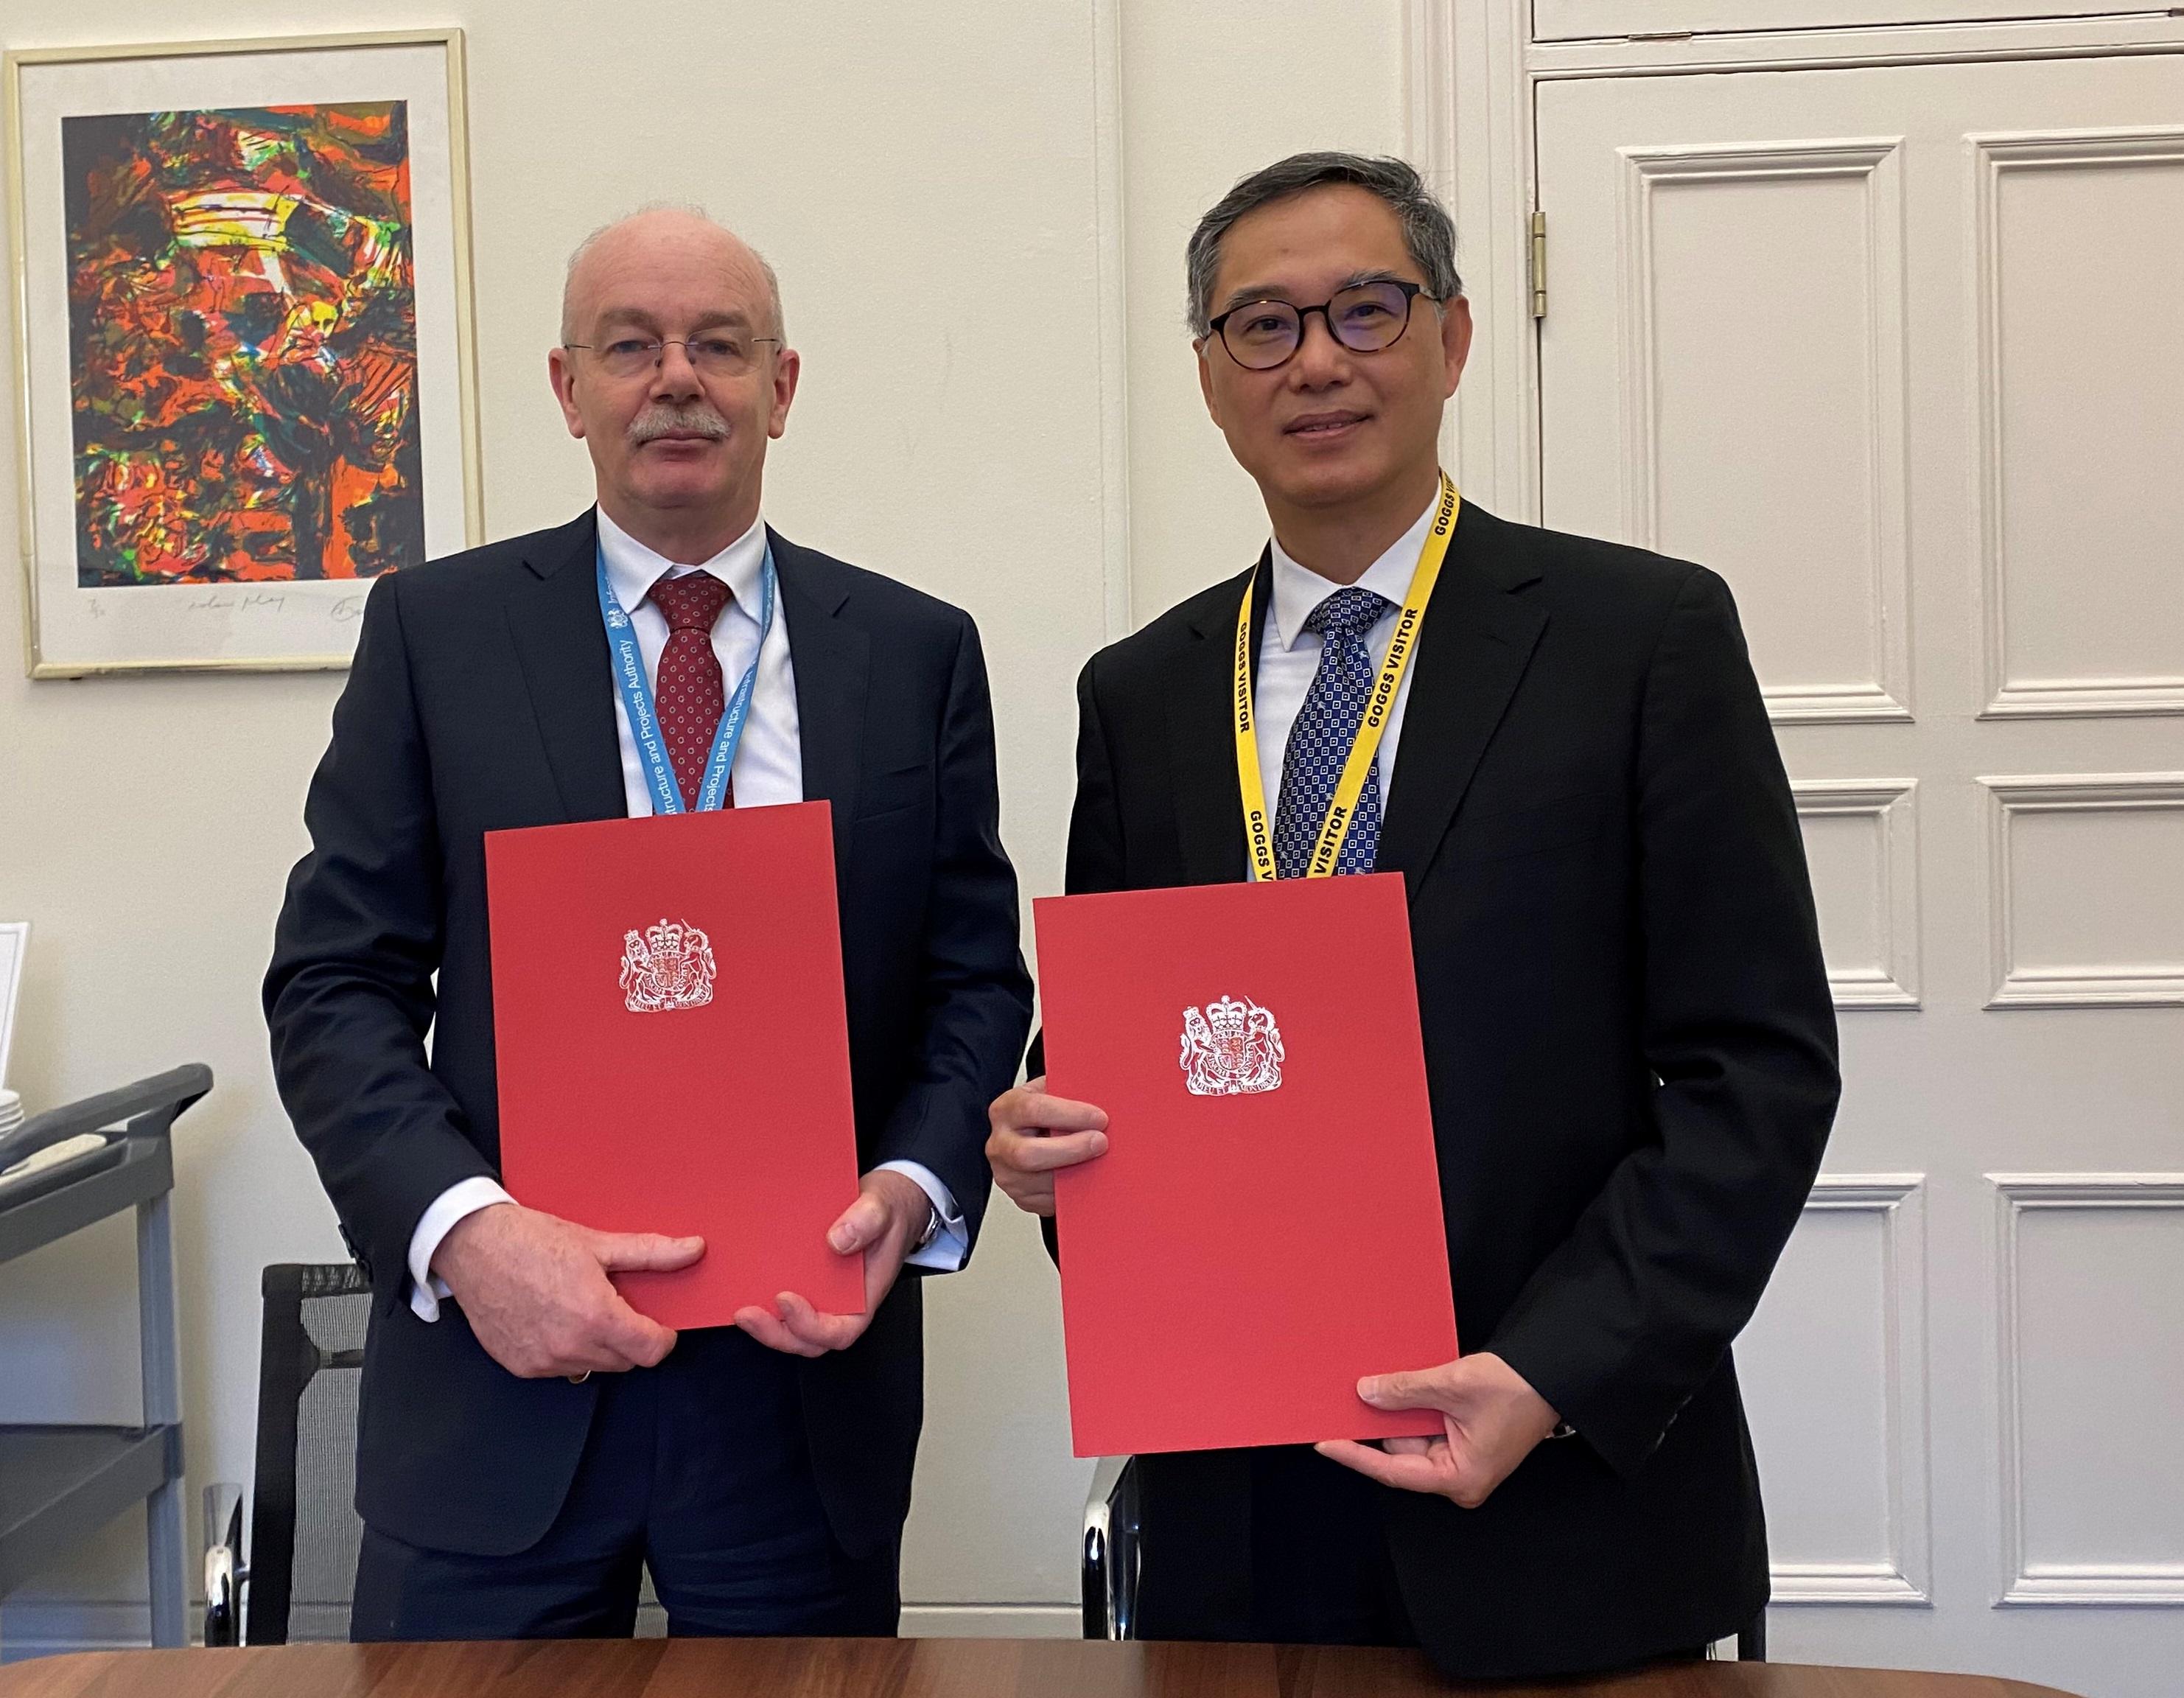 The Permanent Secretary for Development (Works), Mr Ricky Lau (right), and the Chief Executive of the Infrastructure and Projects Authority of the United Kingdom (UK), Mr Nick Smallwood (left), signed a Memorandum of Understanding in London today (February 22, London time) to strengthen exchanges in expertise and experience between Hong Kong and the UK in implementing infrastructure projects.